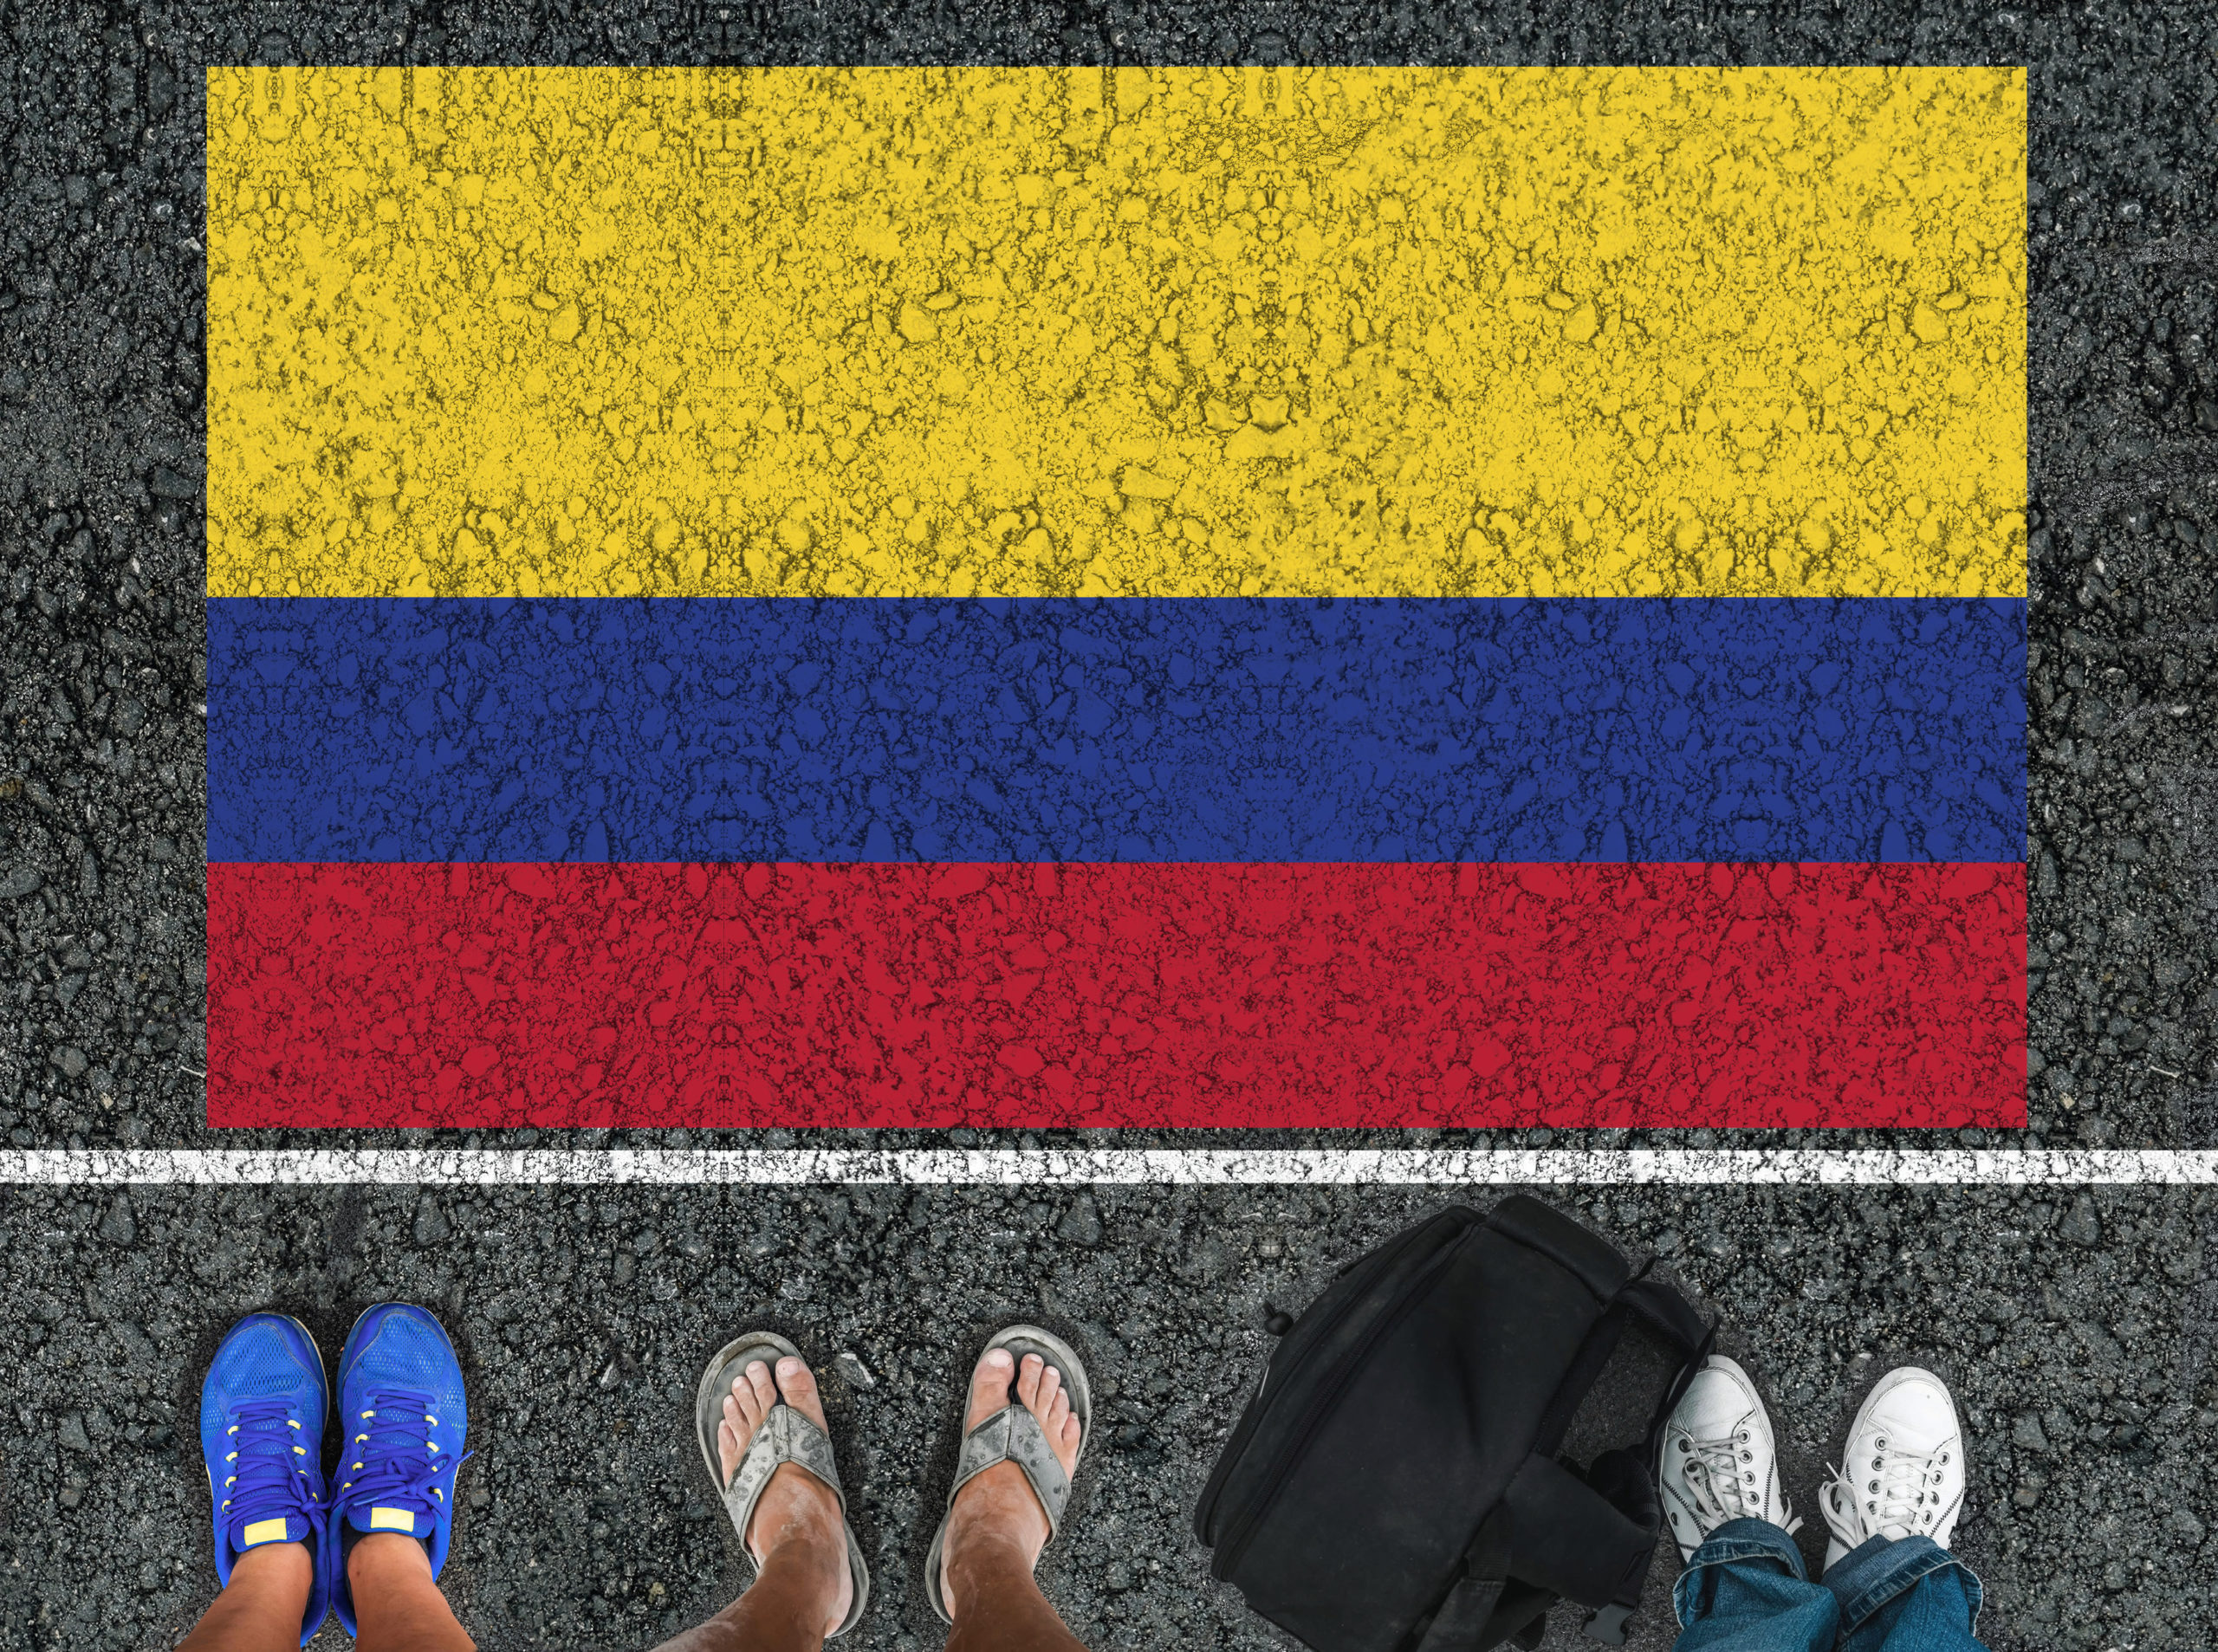 Legs standing on road next to flag of Colombia and border.